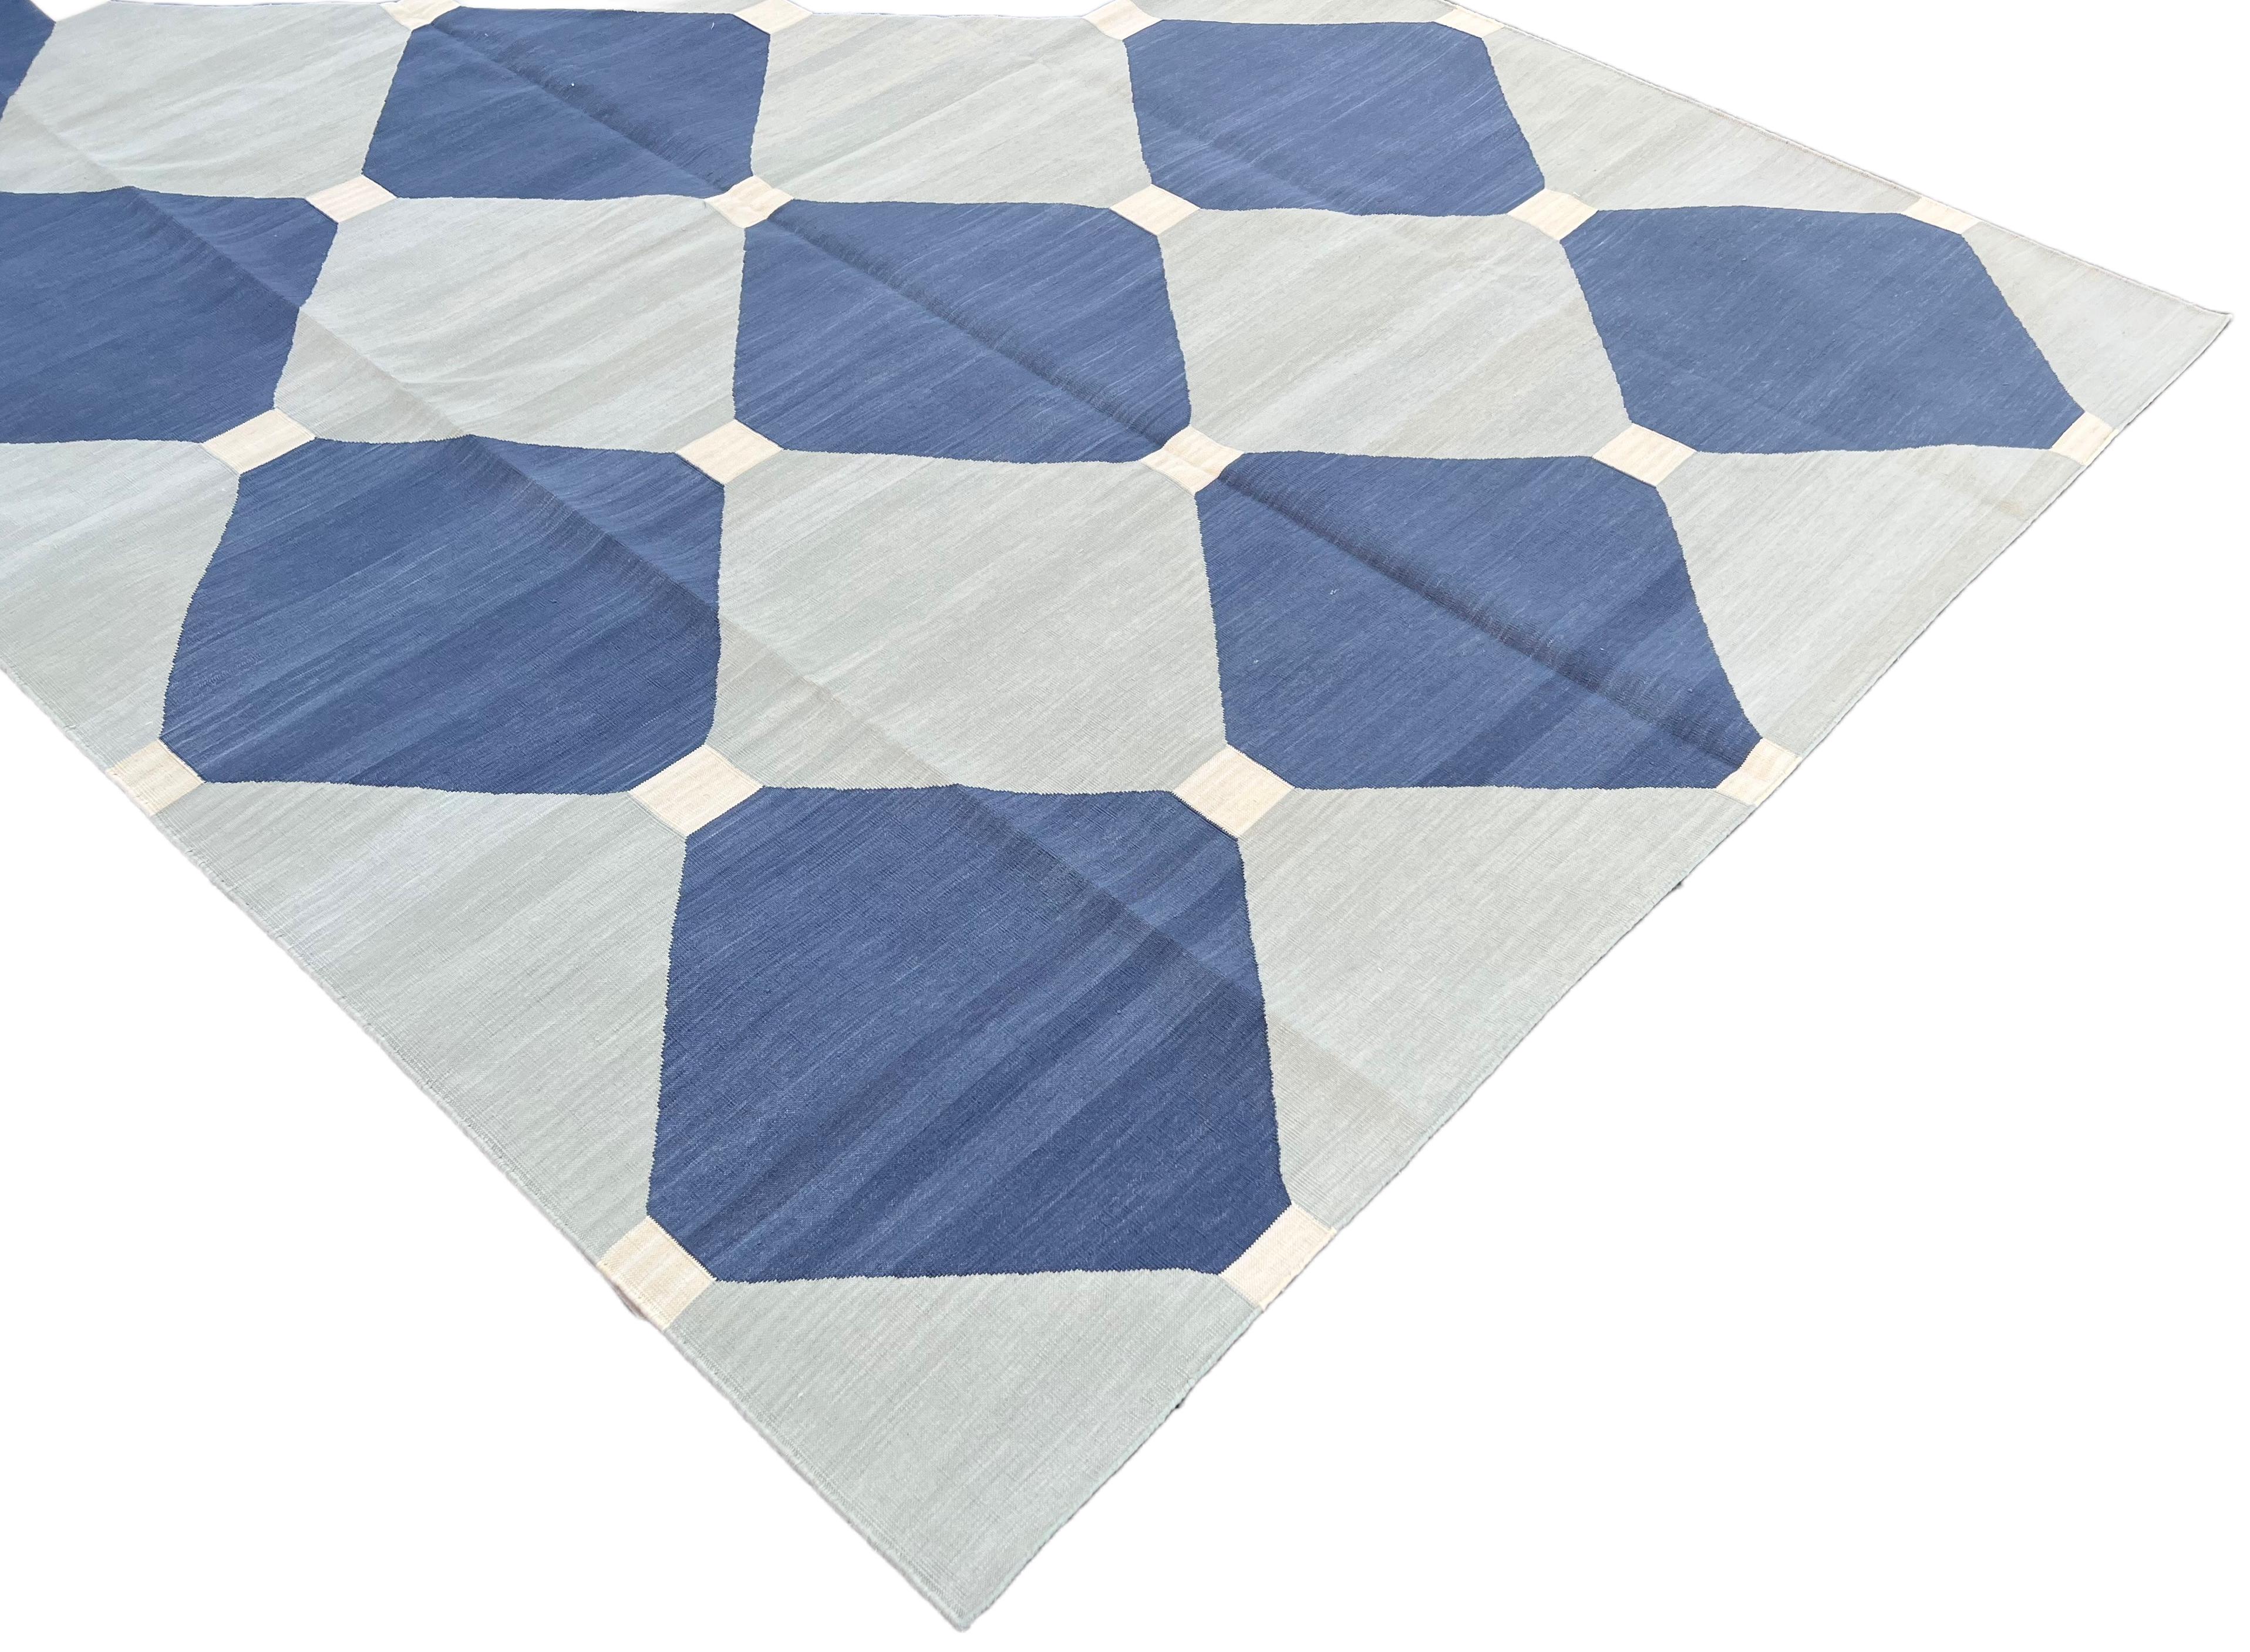 Indian Handmade Cotton Area Flat Weave Rug, 6x9 Grey And Blue Tile Patterned Dhurrie For Sale